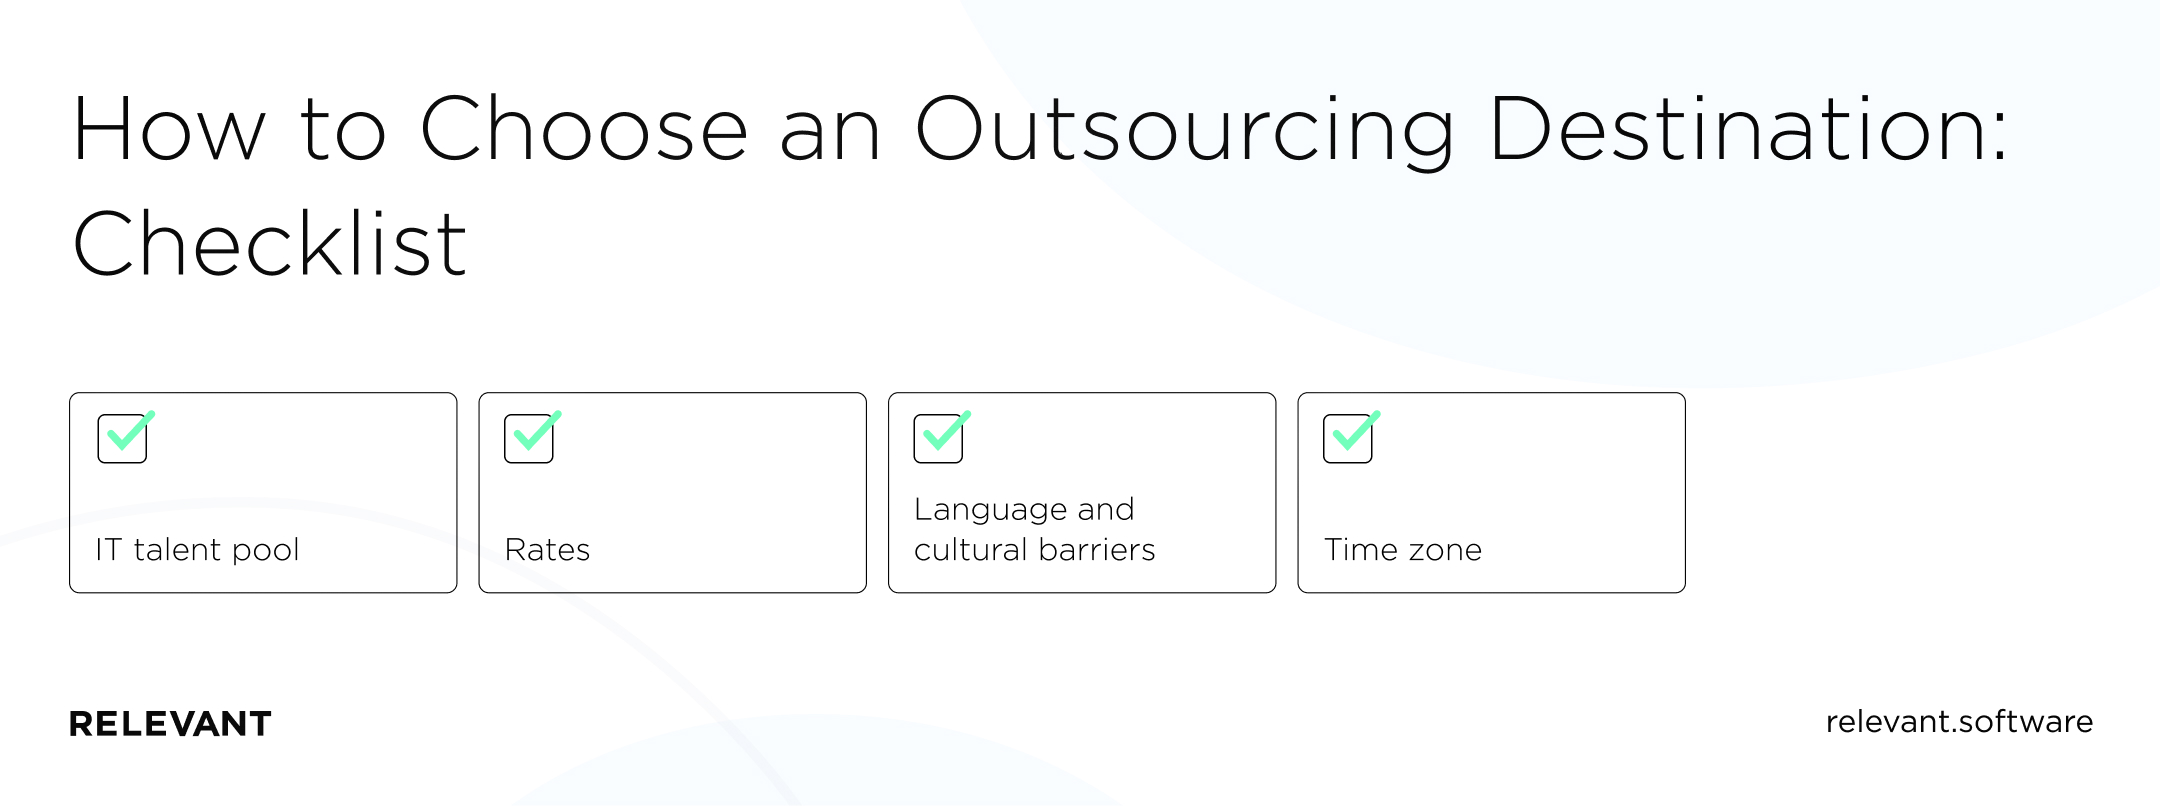 How to Choose an Outsourcing Destination: Checklist